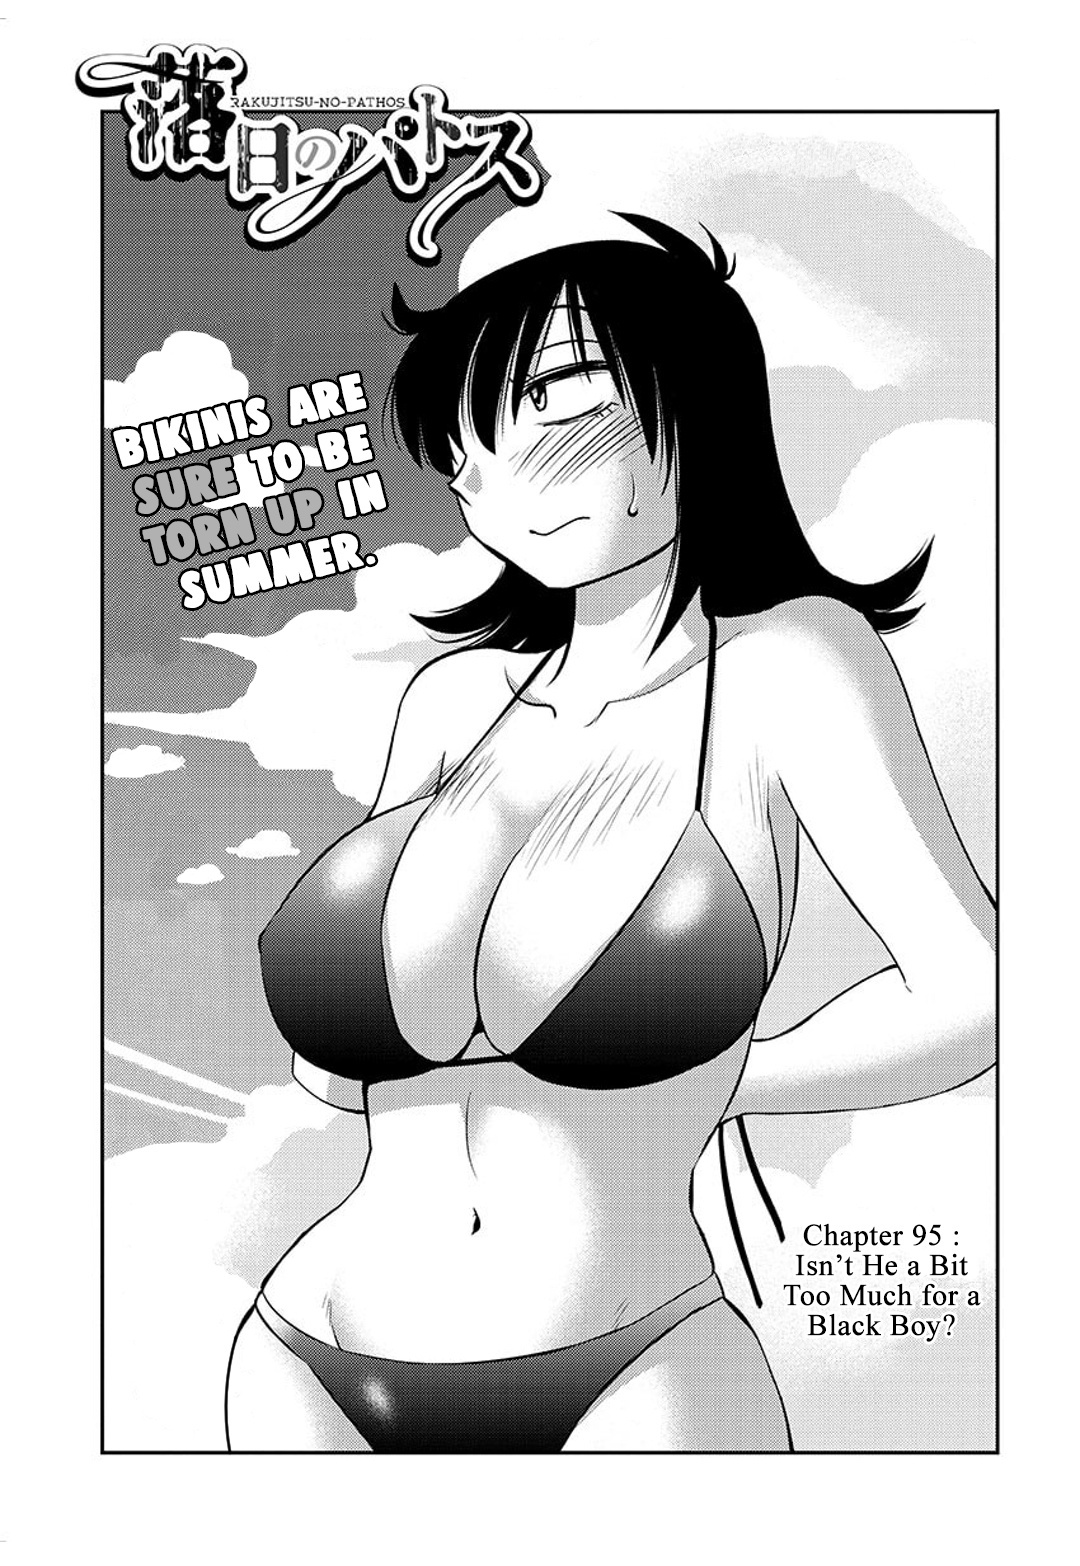 Rakujitsu No Pathos Vol.14 Chapter 95: Isn’T He A Bit Too Much For A Black Boy? - Picture 2